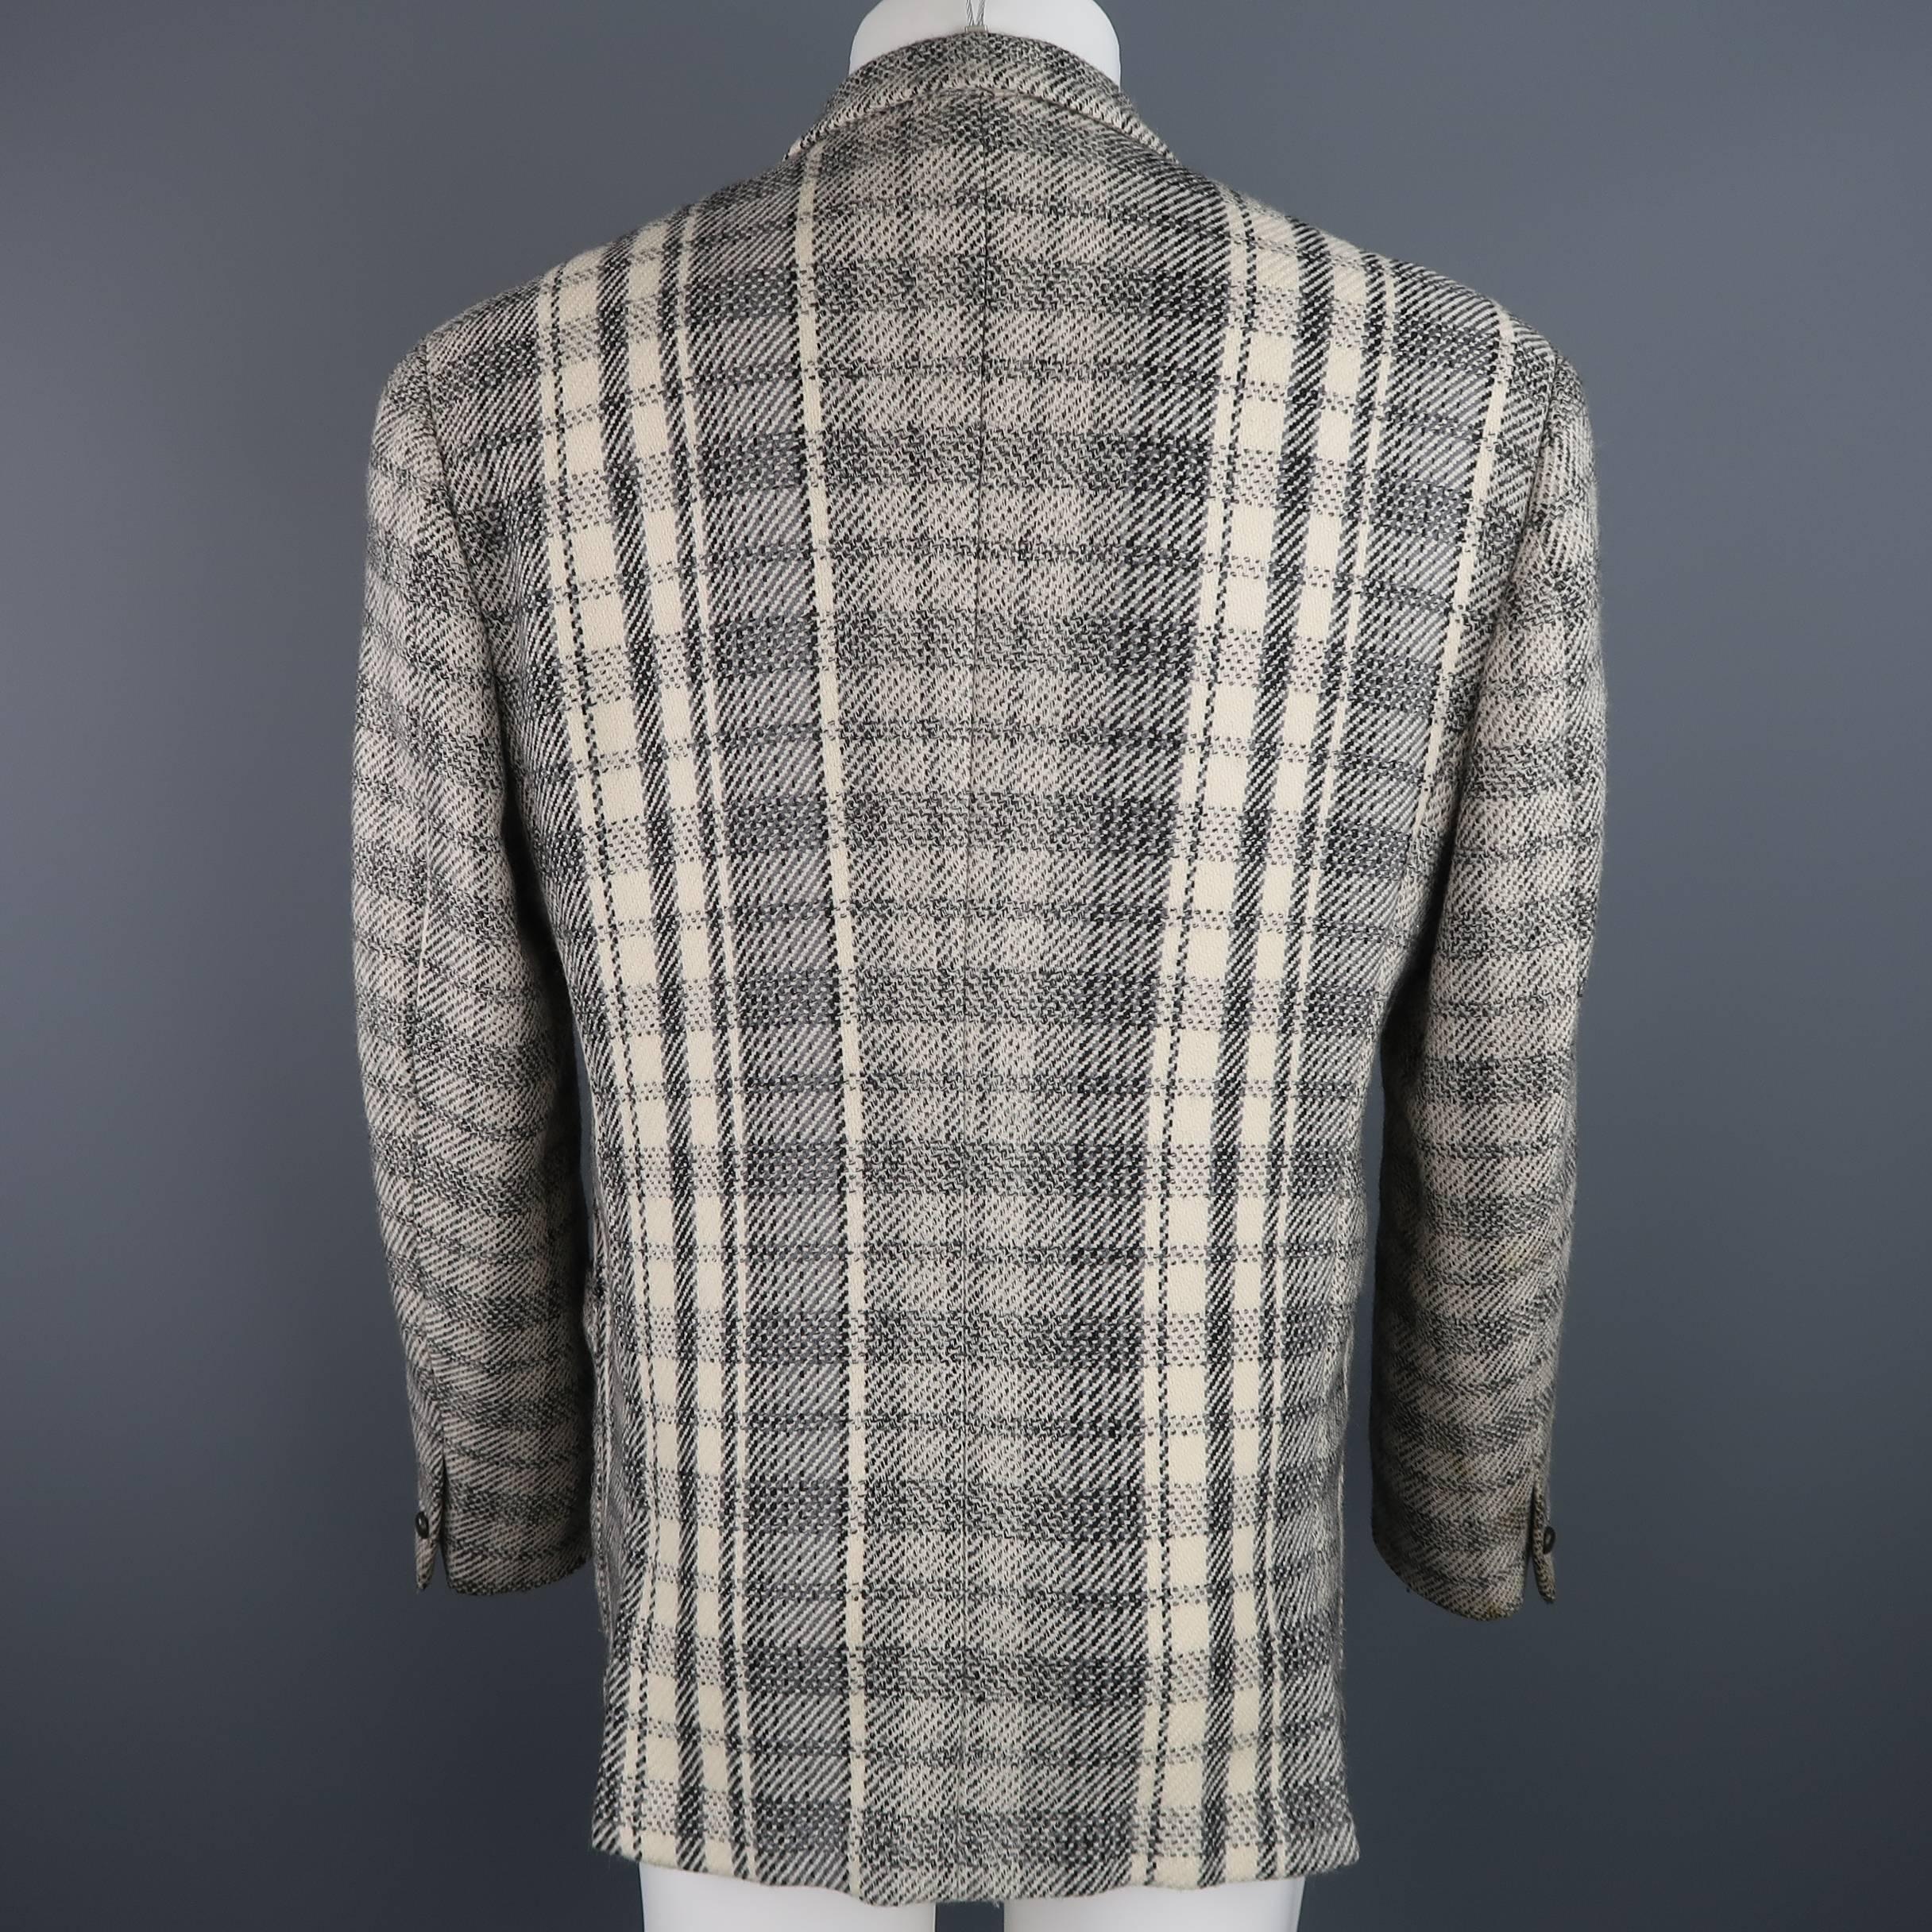 GIANNI VERSACE 40 Short Grey & Beige Plaid Wool Blend Double Breasted Jacket 4